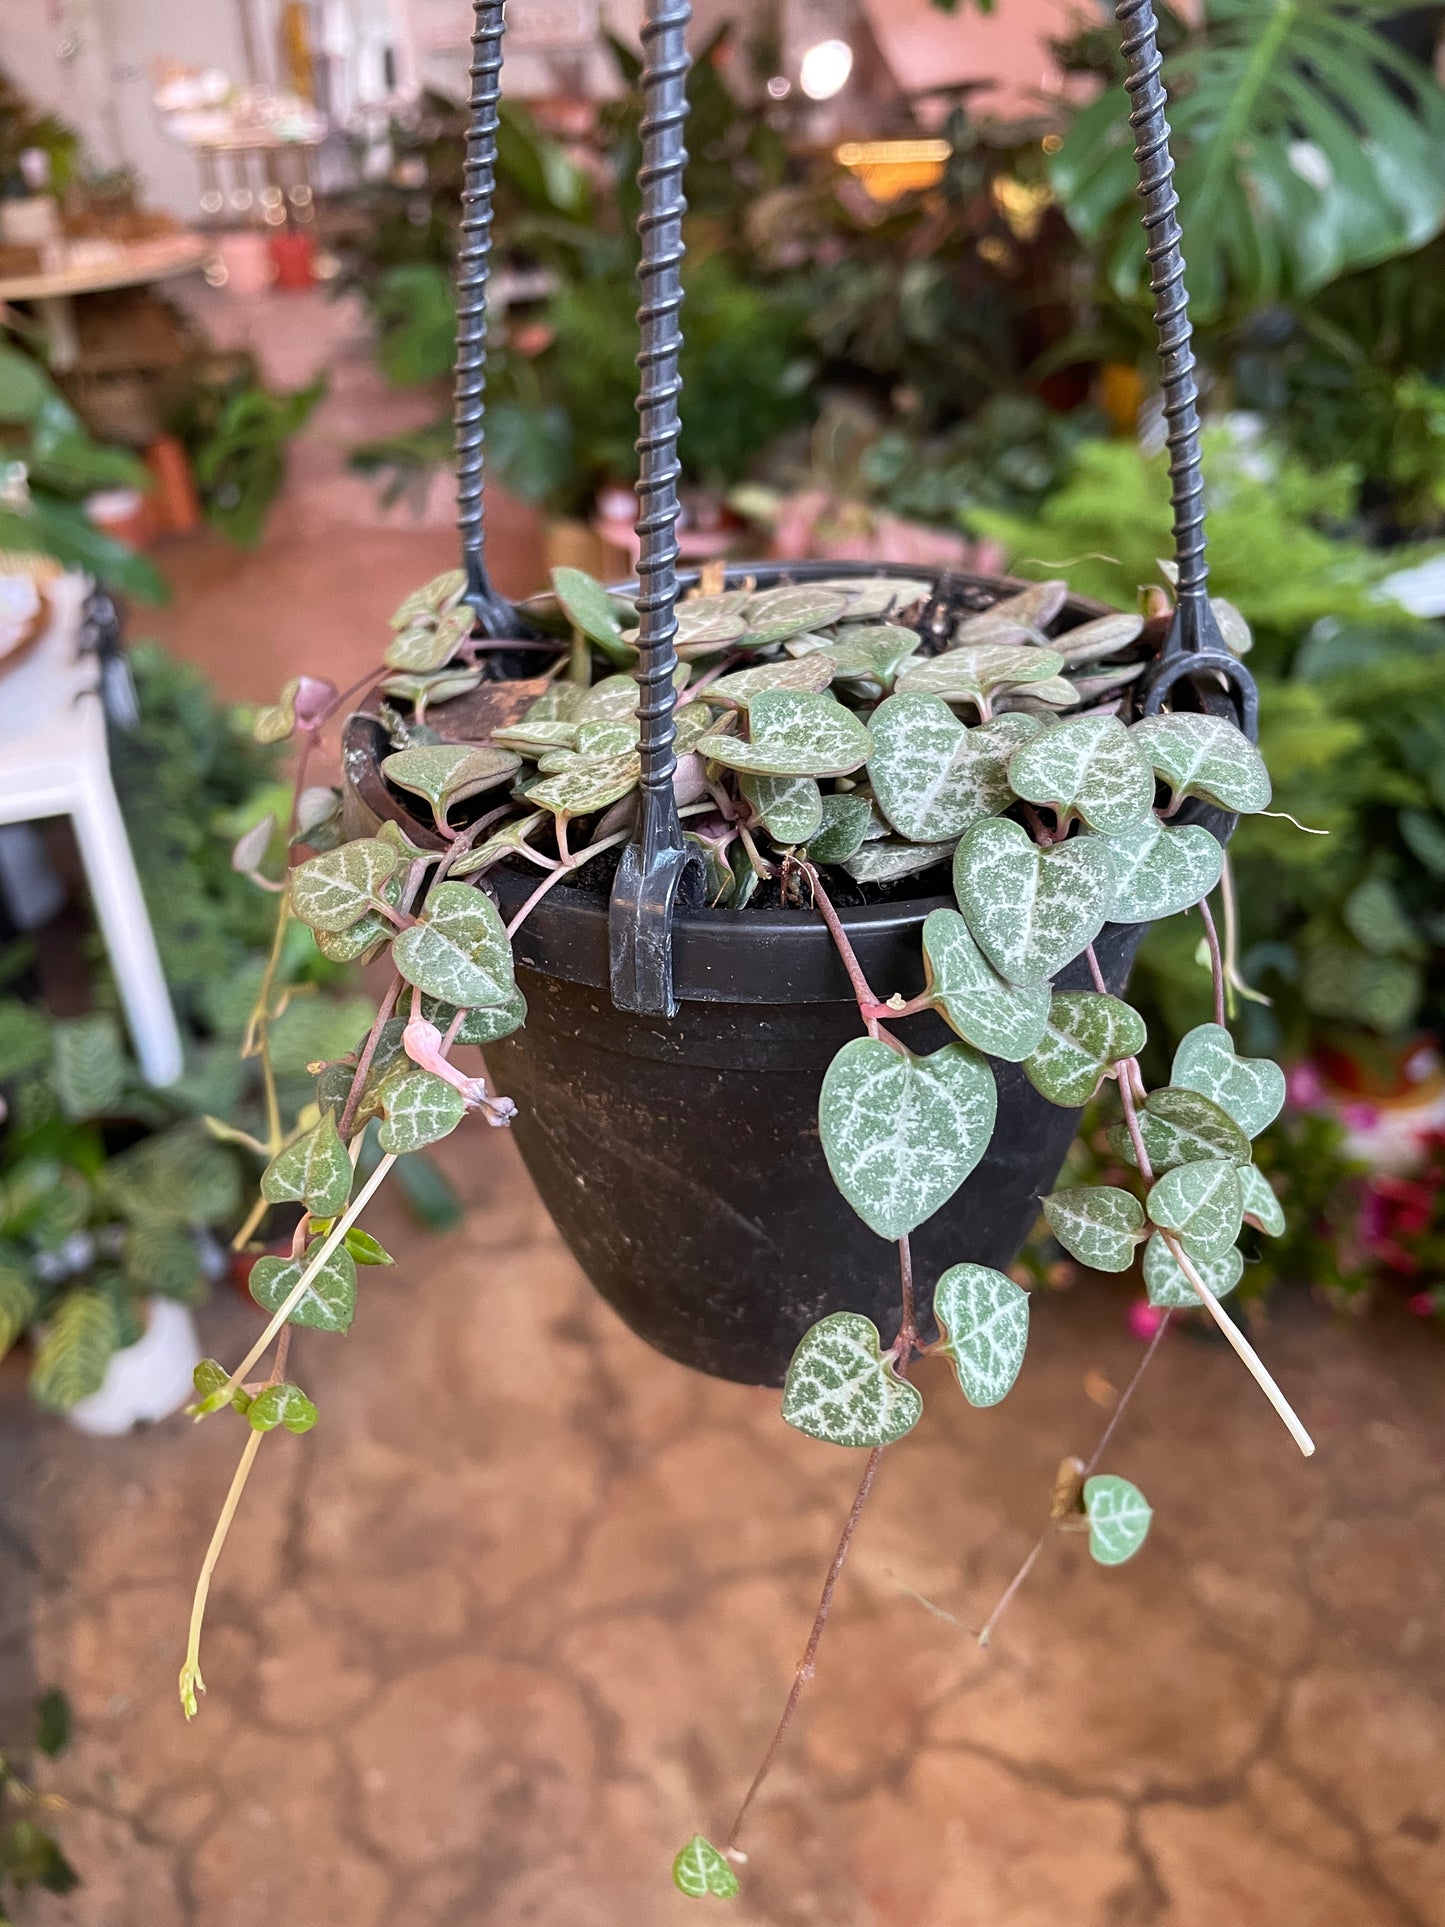 Ceropegia linearis subsp. woodii (String of Hearts) 4" hanging basket